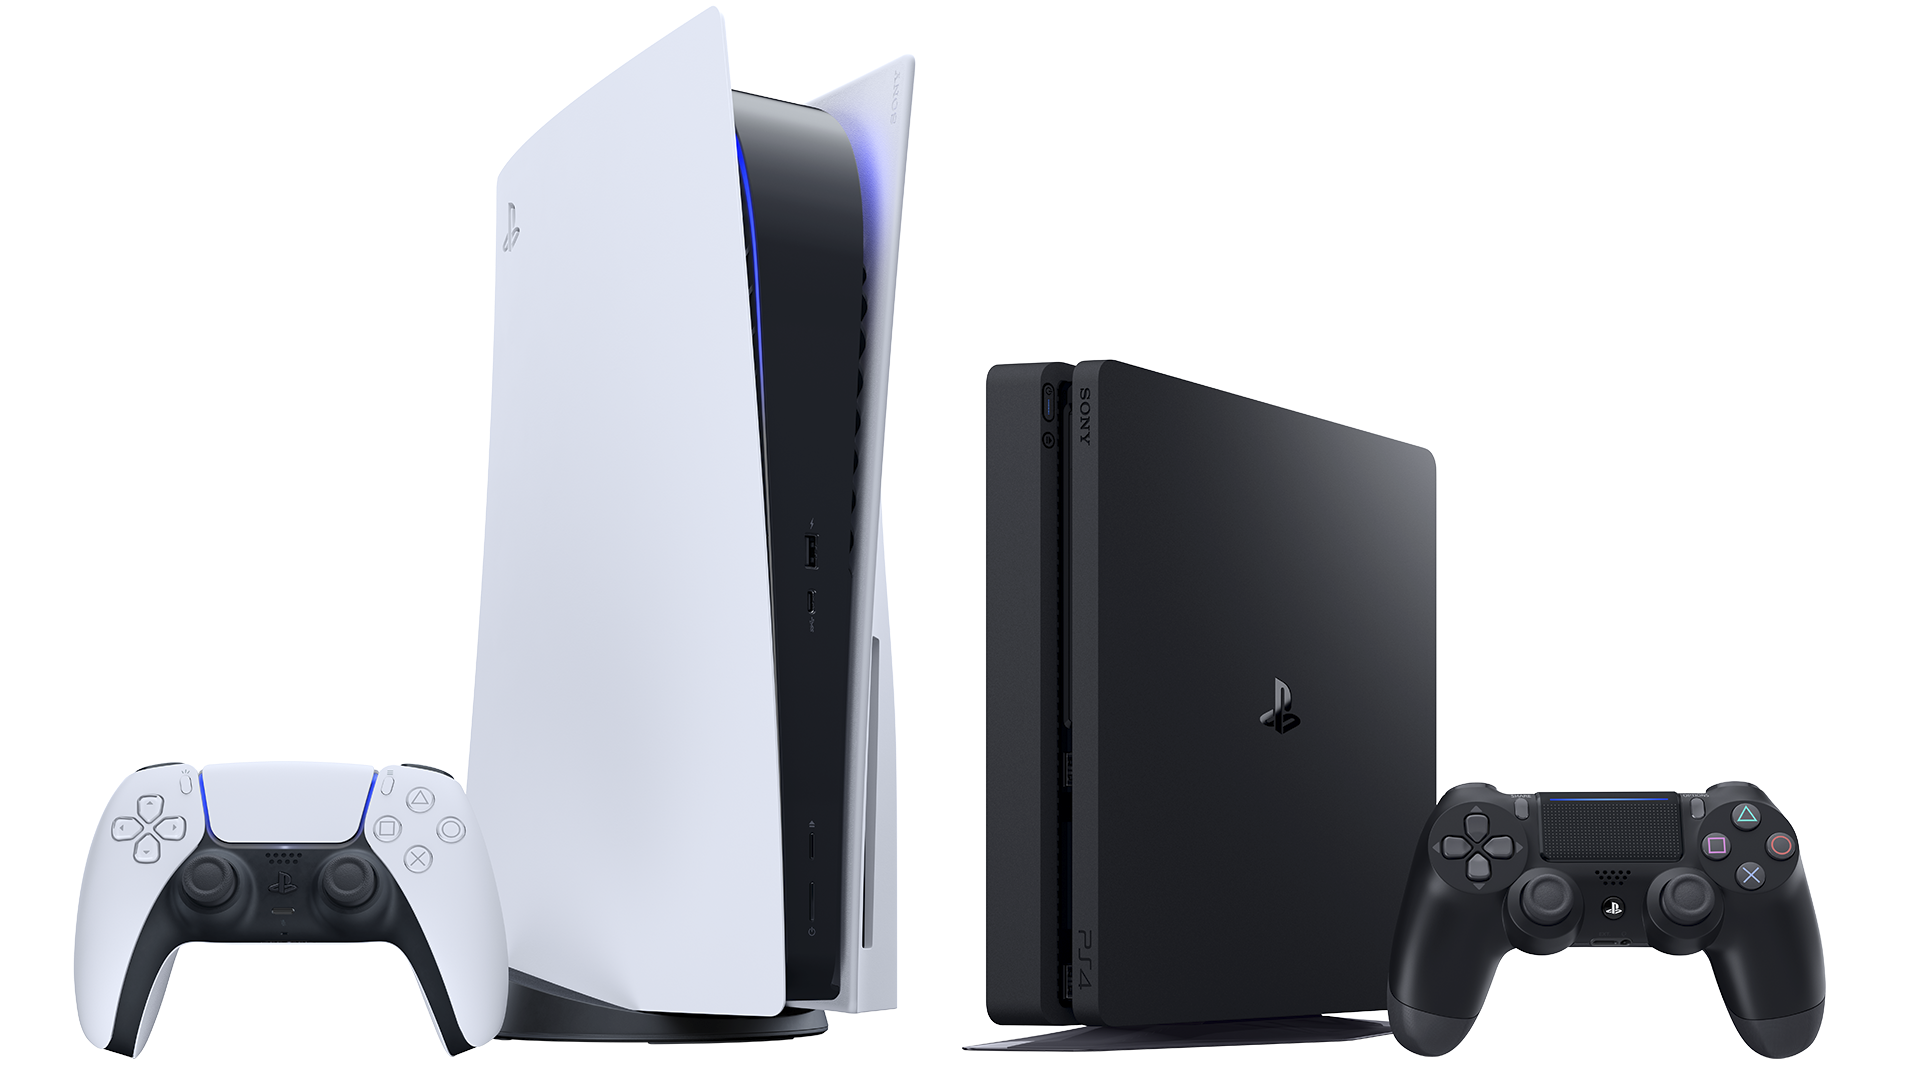 PS5 and PS5 consoles standing side by side